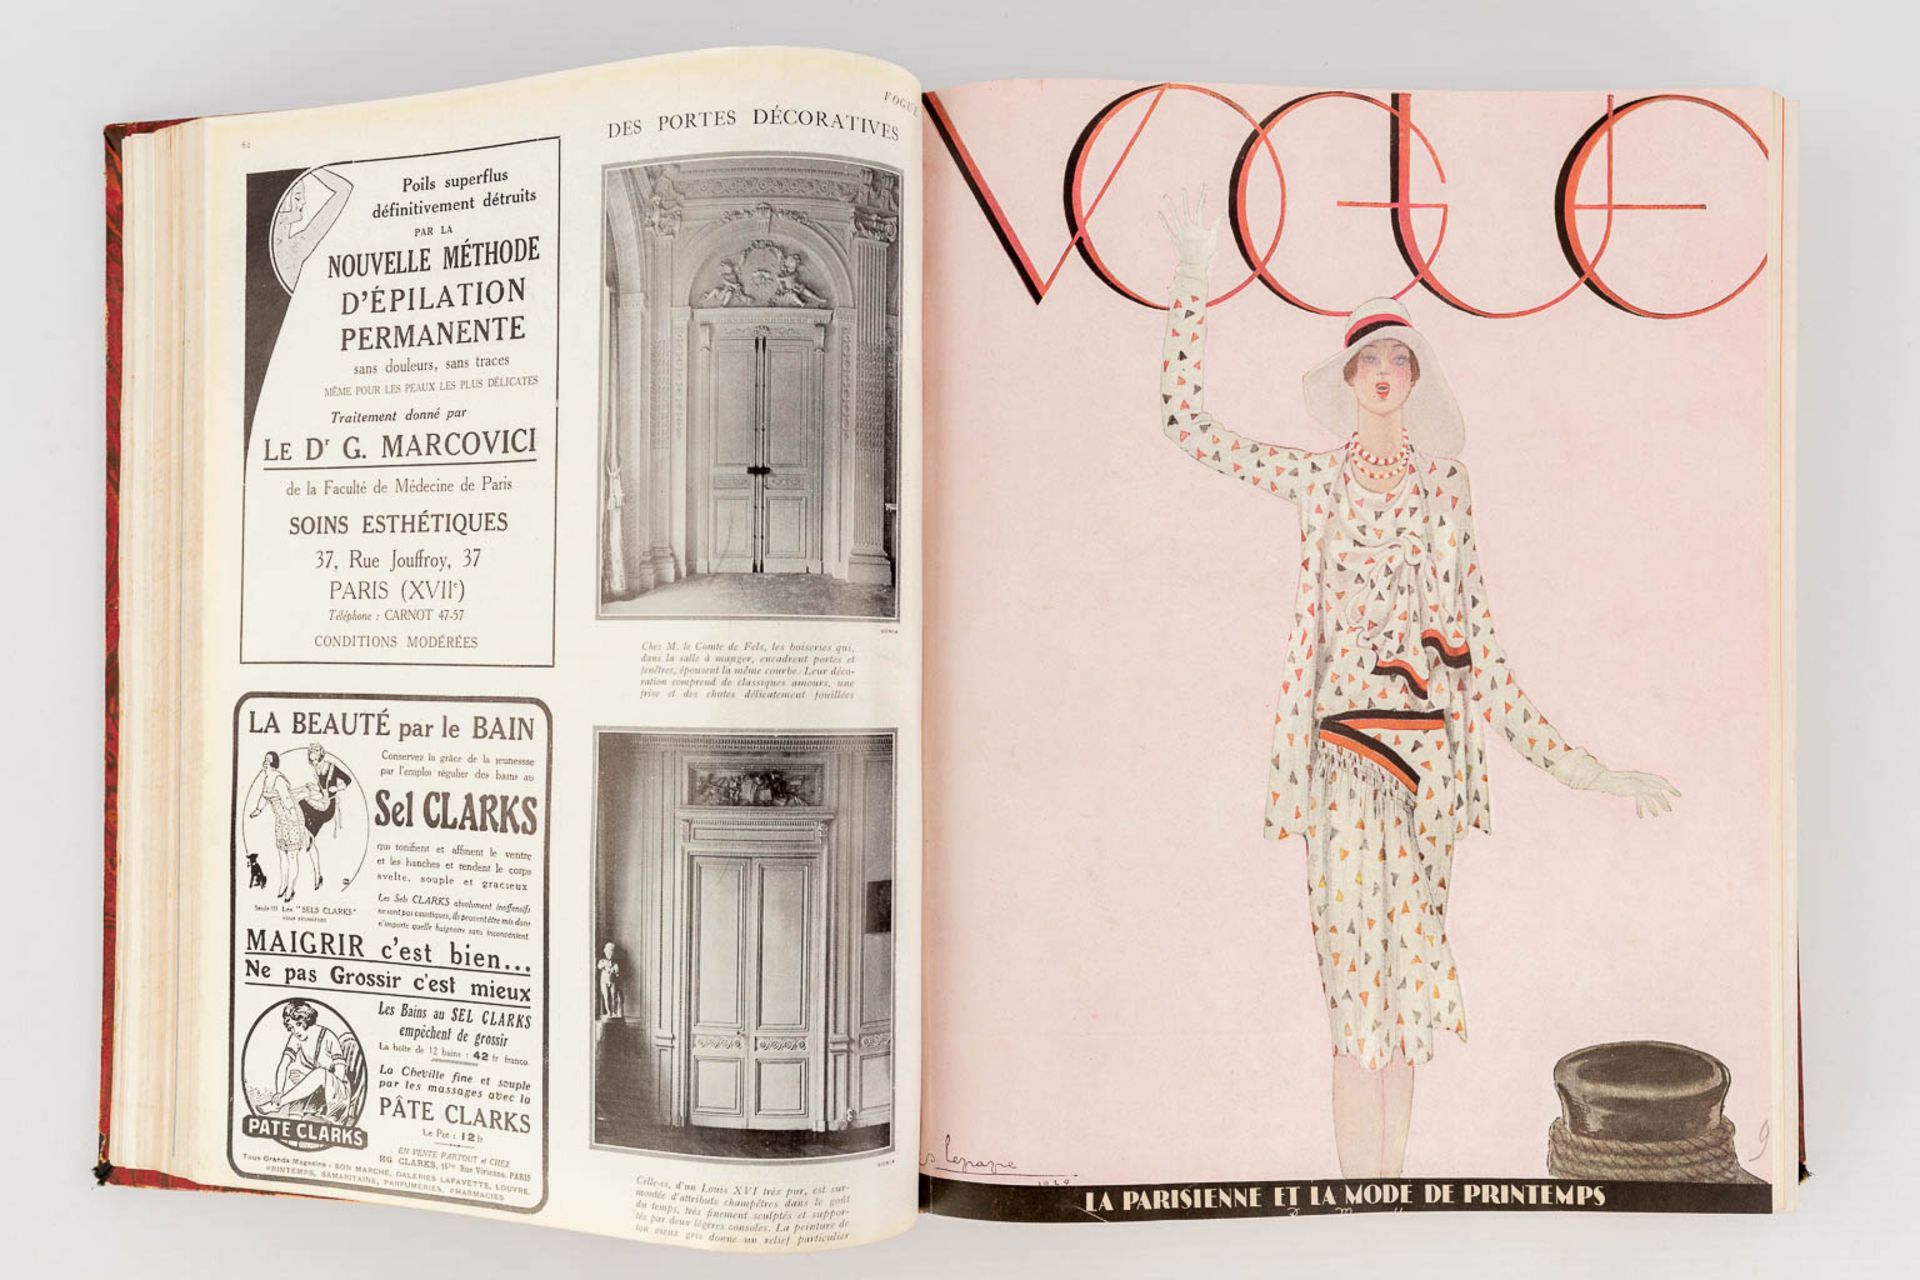 An assembled book with the Vogue magazine, 1929. (L: 5 x W: 25,5 x H: 31,5 cm) - Image 6 of 18